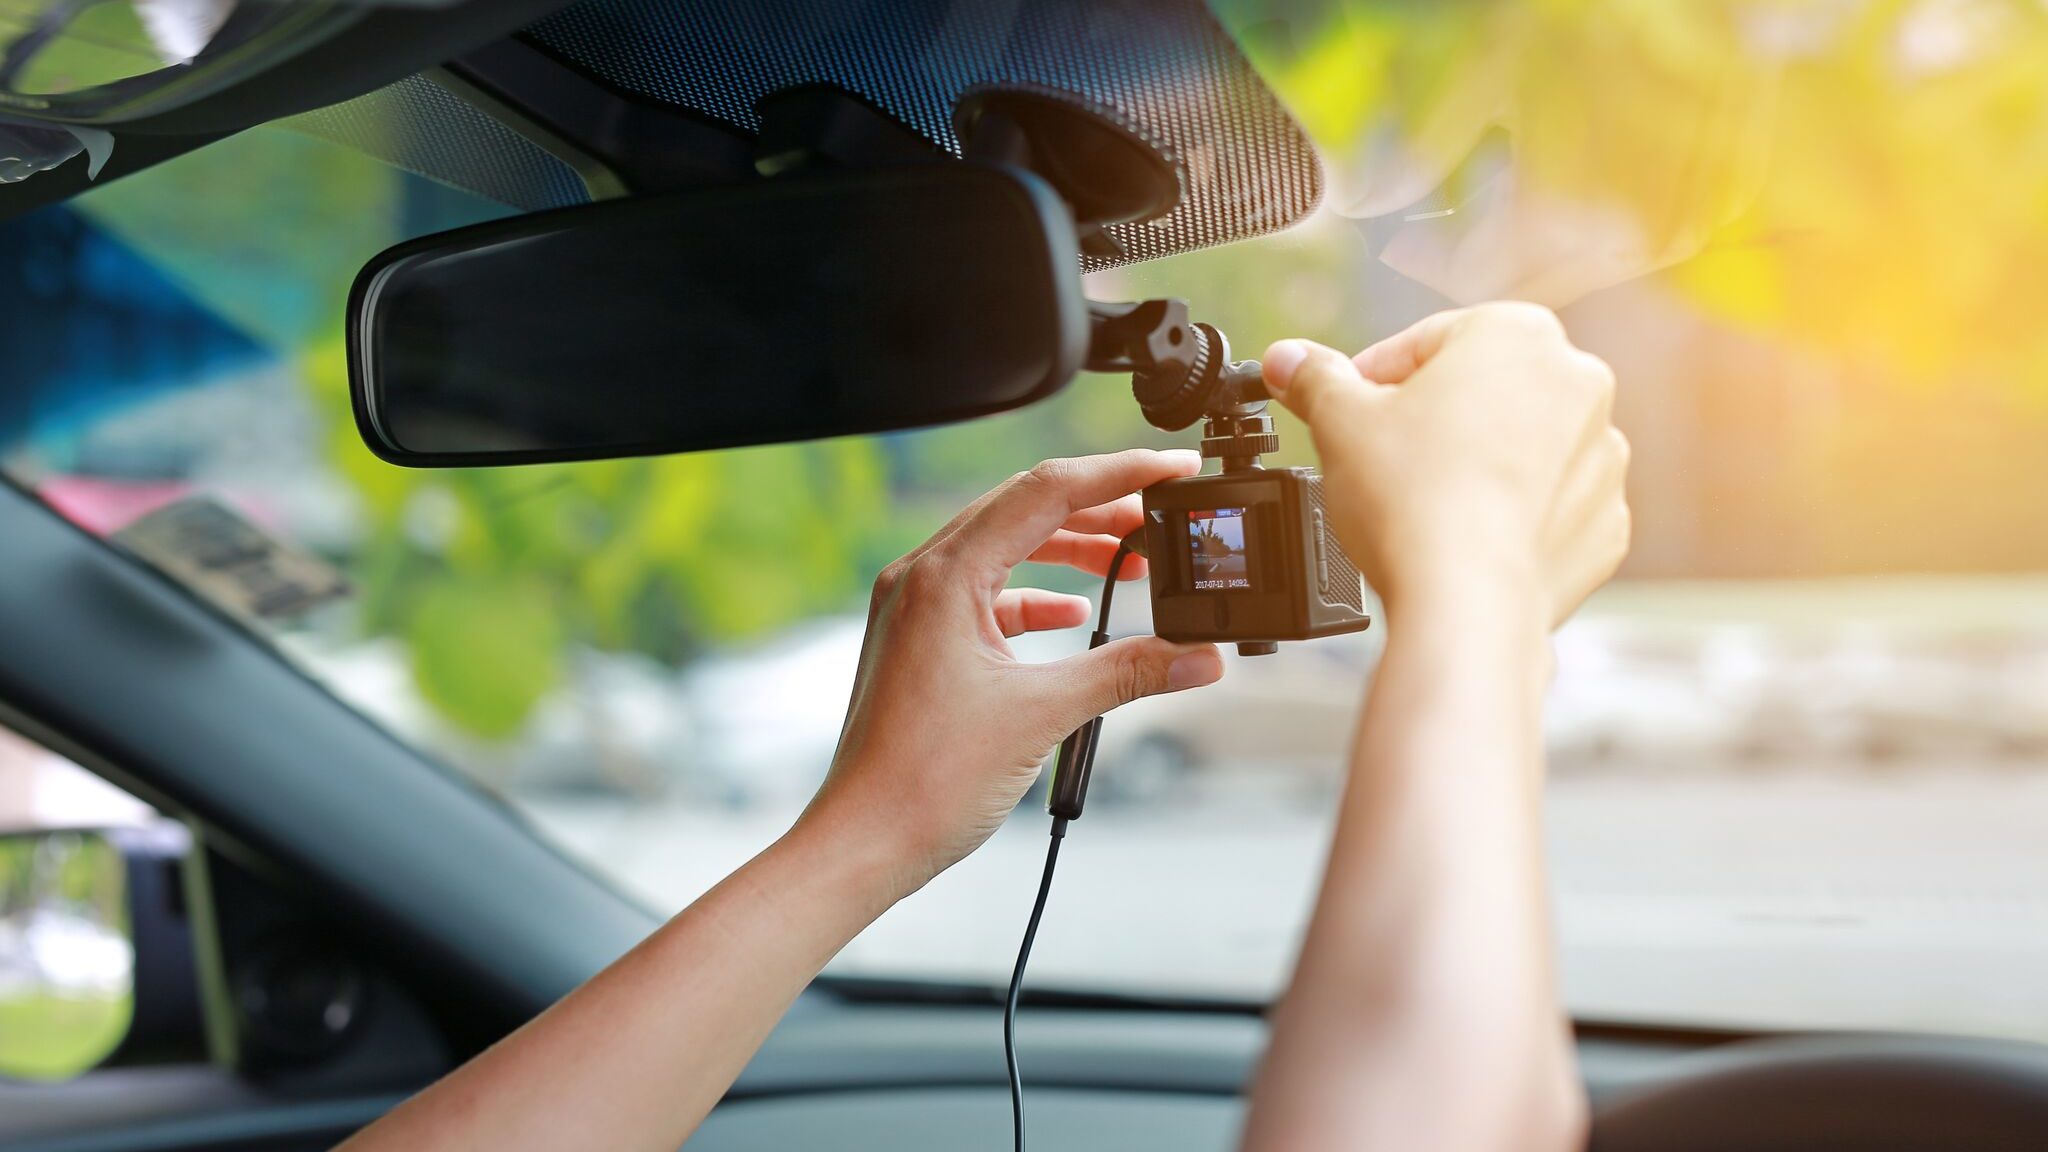 All you need to know about dash cam installation